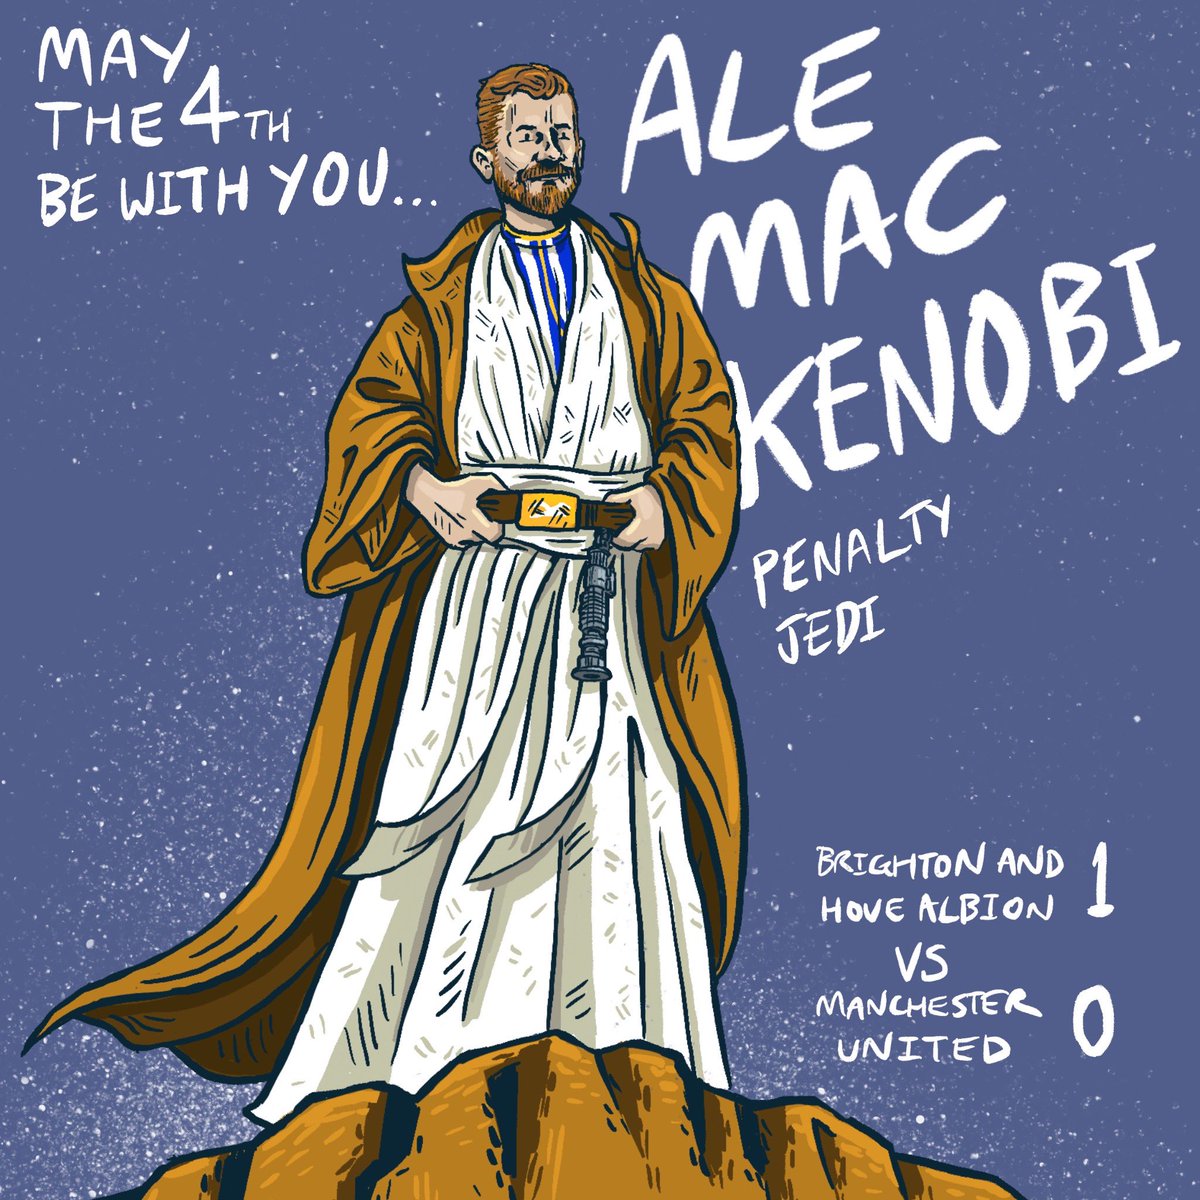 #May4thBeWithYou #BHAFC #AlexisMacAllister #penalty #jedi